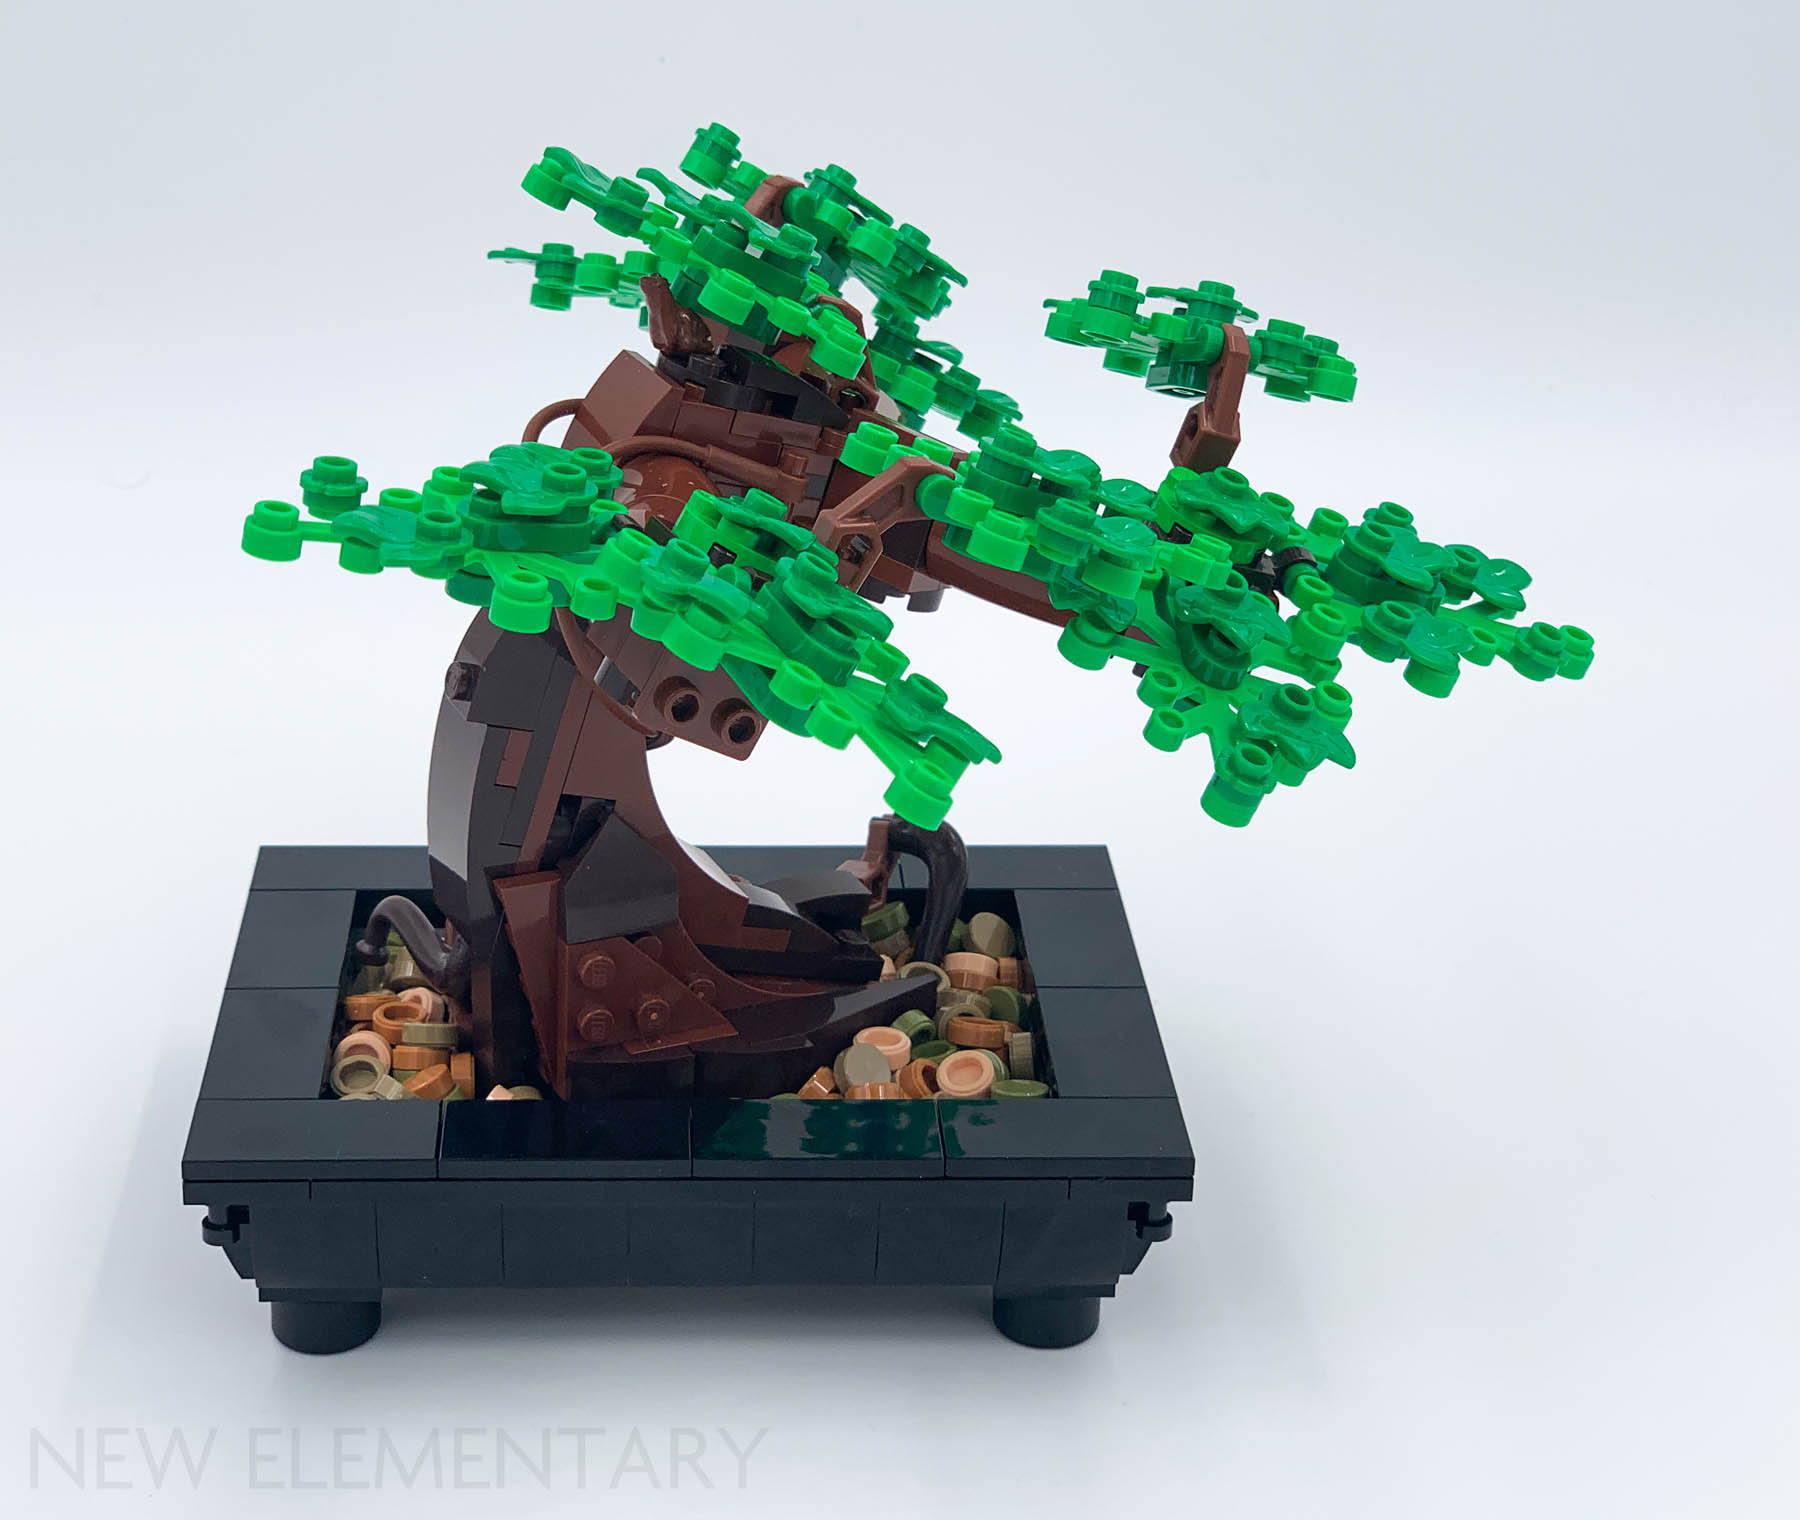 LEGO Bonsai Tree review: 2021's best creation so far - 9to5Toys